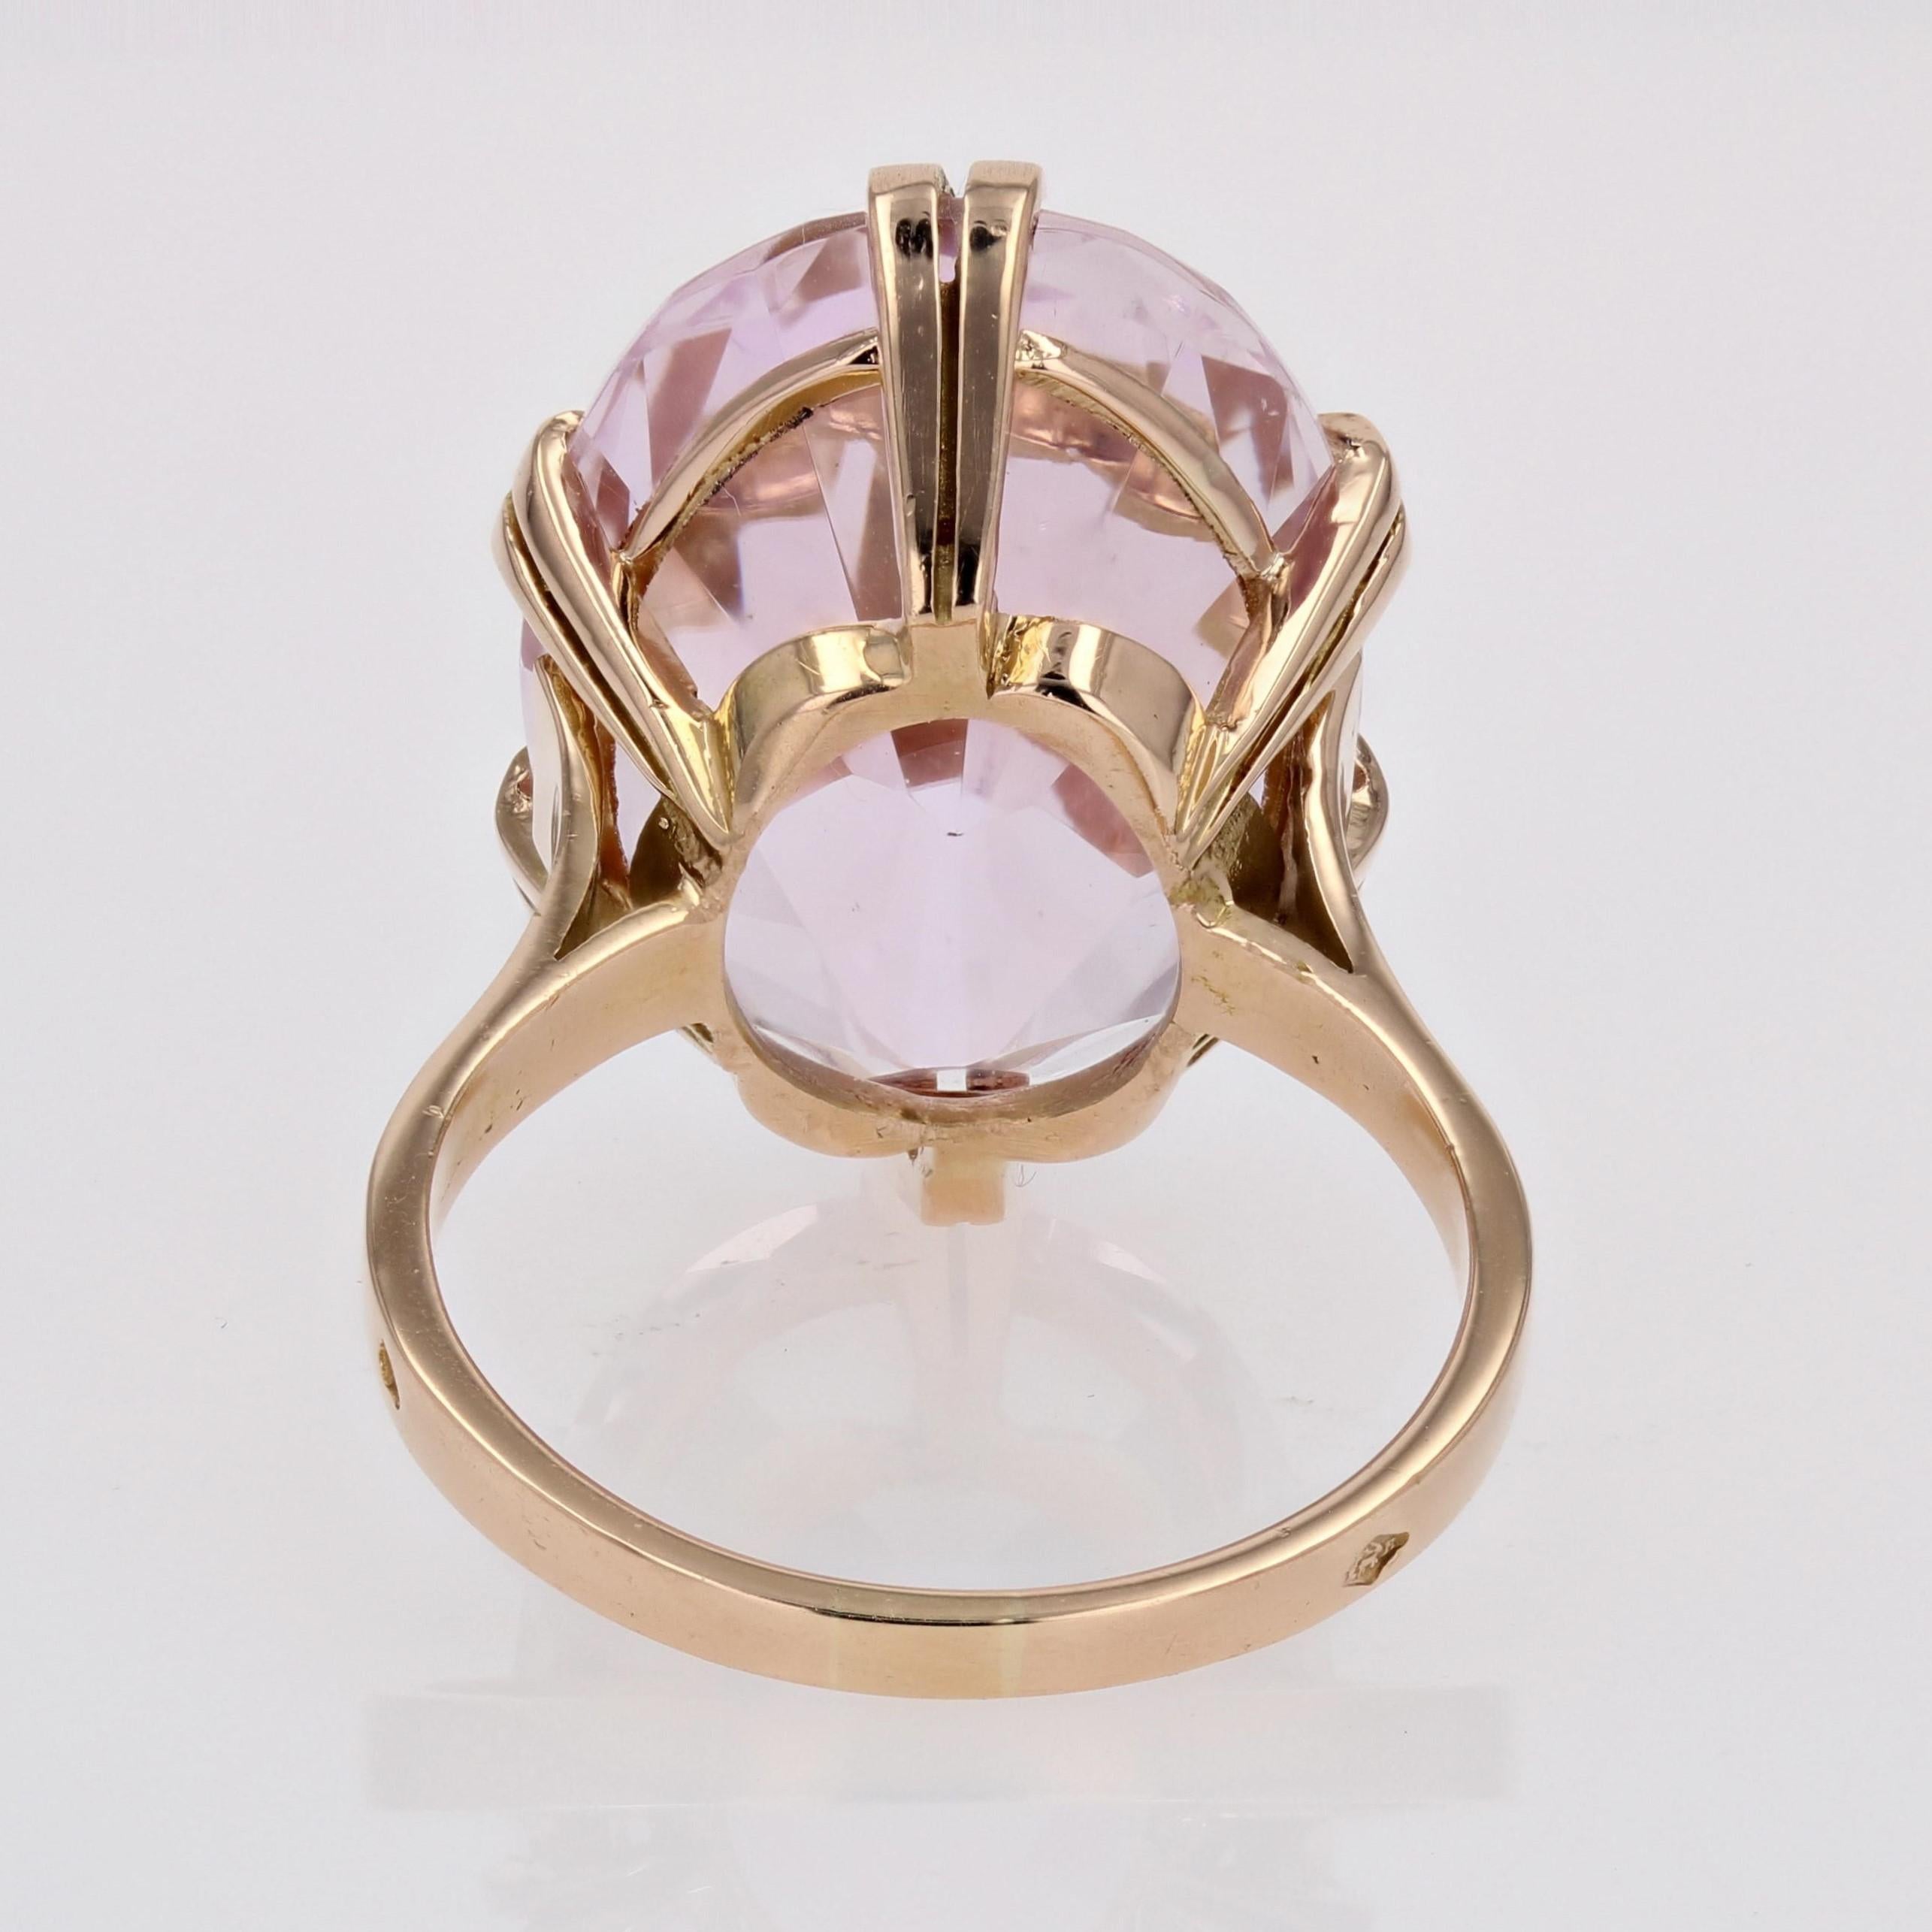 French Retro 1960s 17.71 Carats Kunzite 18 Karat Rose Gold Cocktail Ring For Sale 12